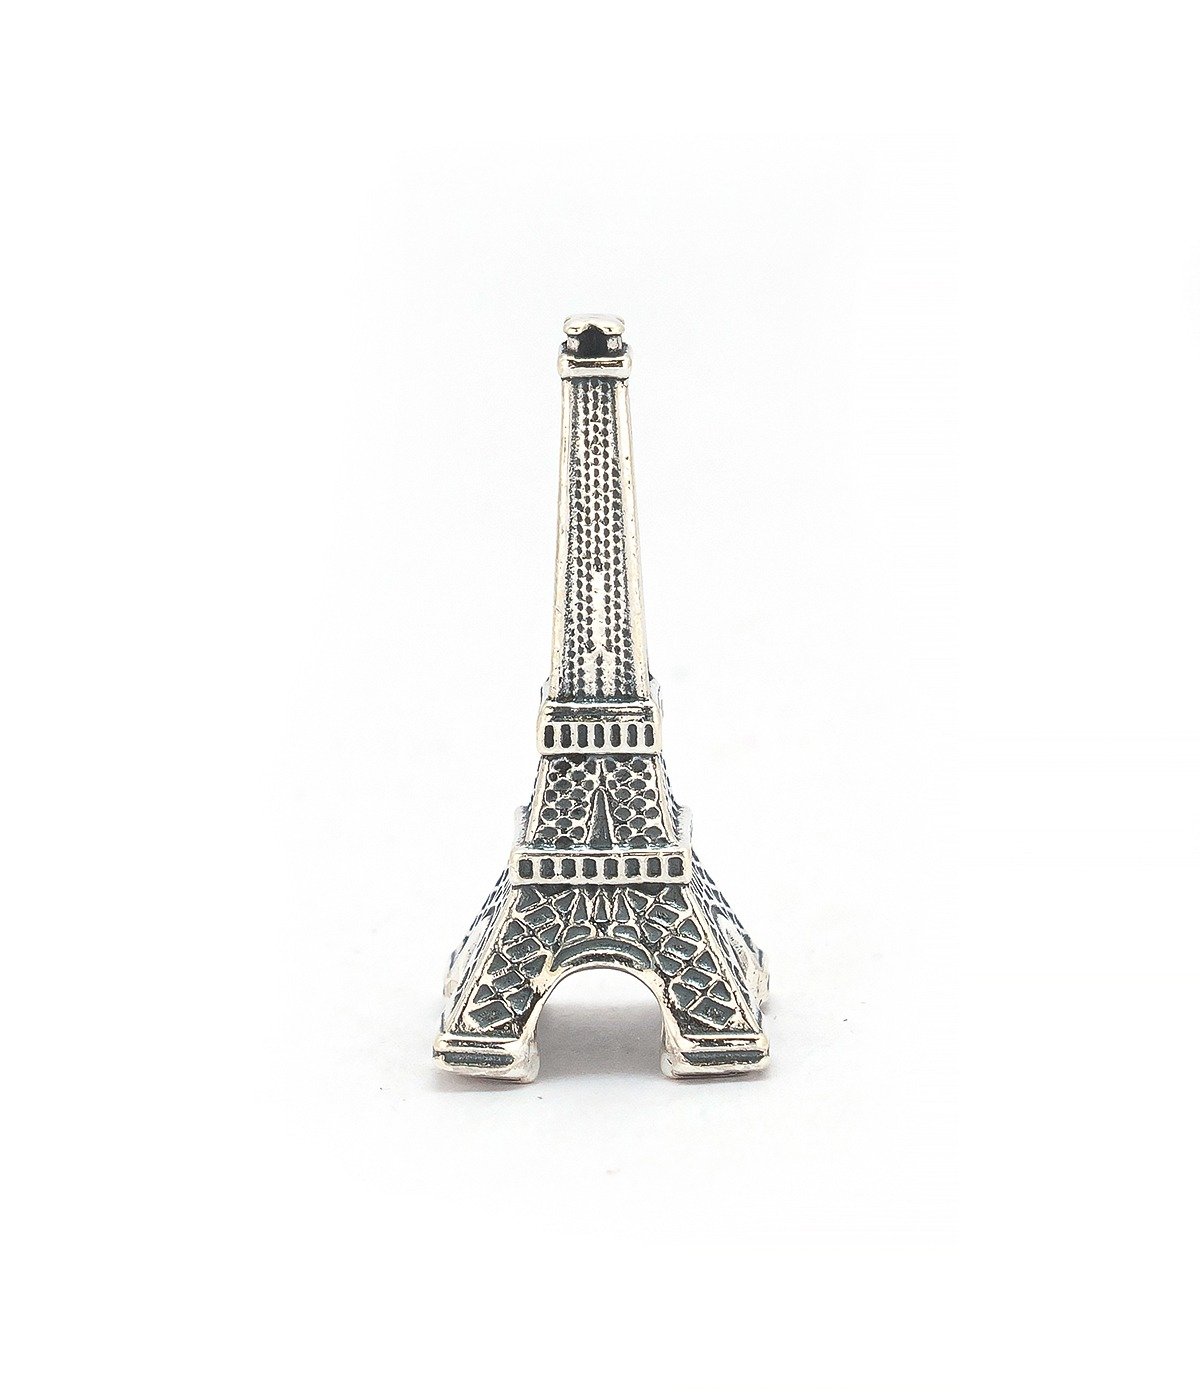 92.5 STERLING SILVER  MINIATURE EIFFEL TOWER FOR GIFT